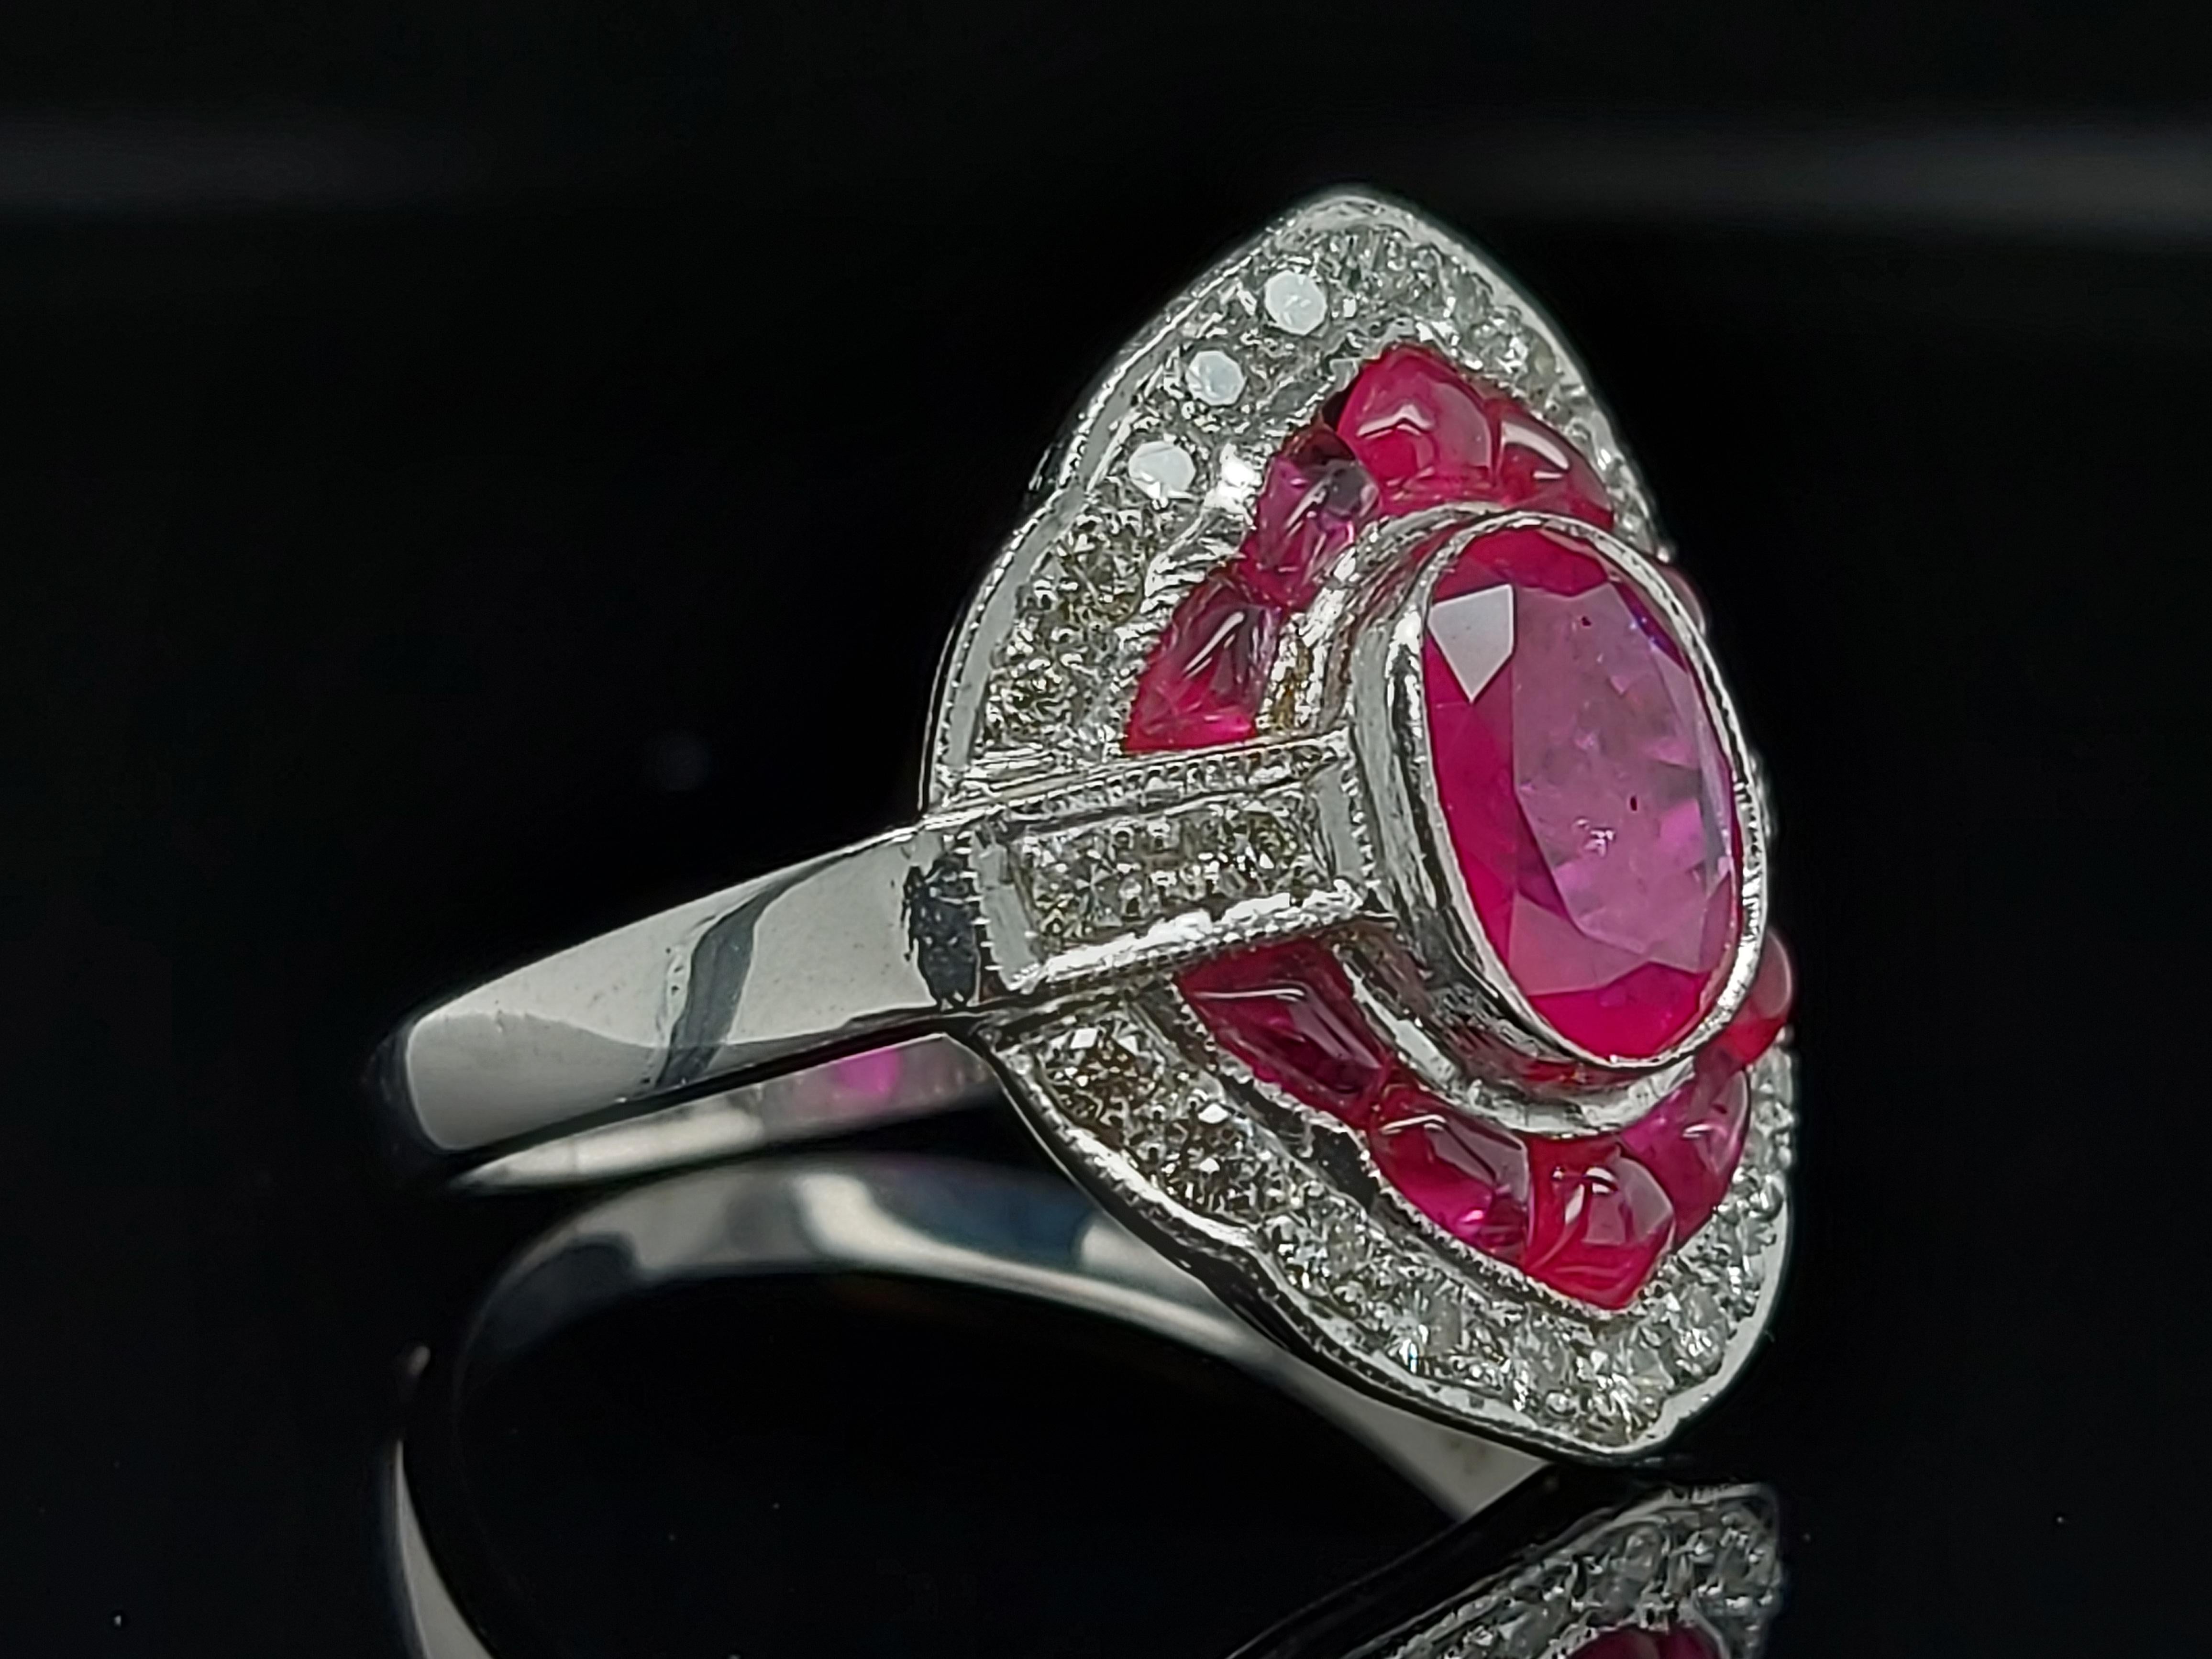 Stunning 18 kt White Gold Ring With Rubies and Brilliant Cut Diamonds

Ruby: Ca. 2 ct and 10 Ruby Cabuchon cut Ca. 2 ct.

Diamonds: 26 brilliant cut diamonds, Ca. 0,78 ct

Material: 18kt white gold

Ring size: 57 ( can be adjusted for